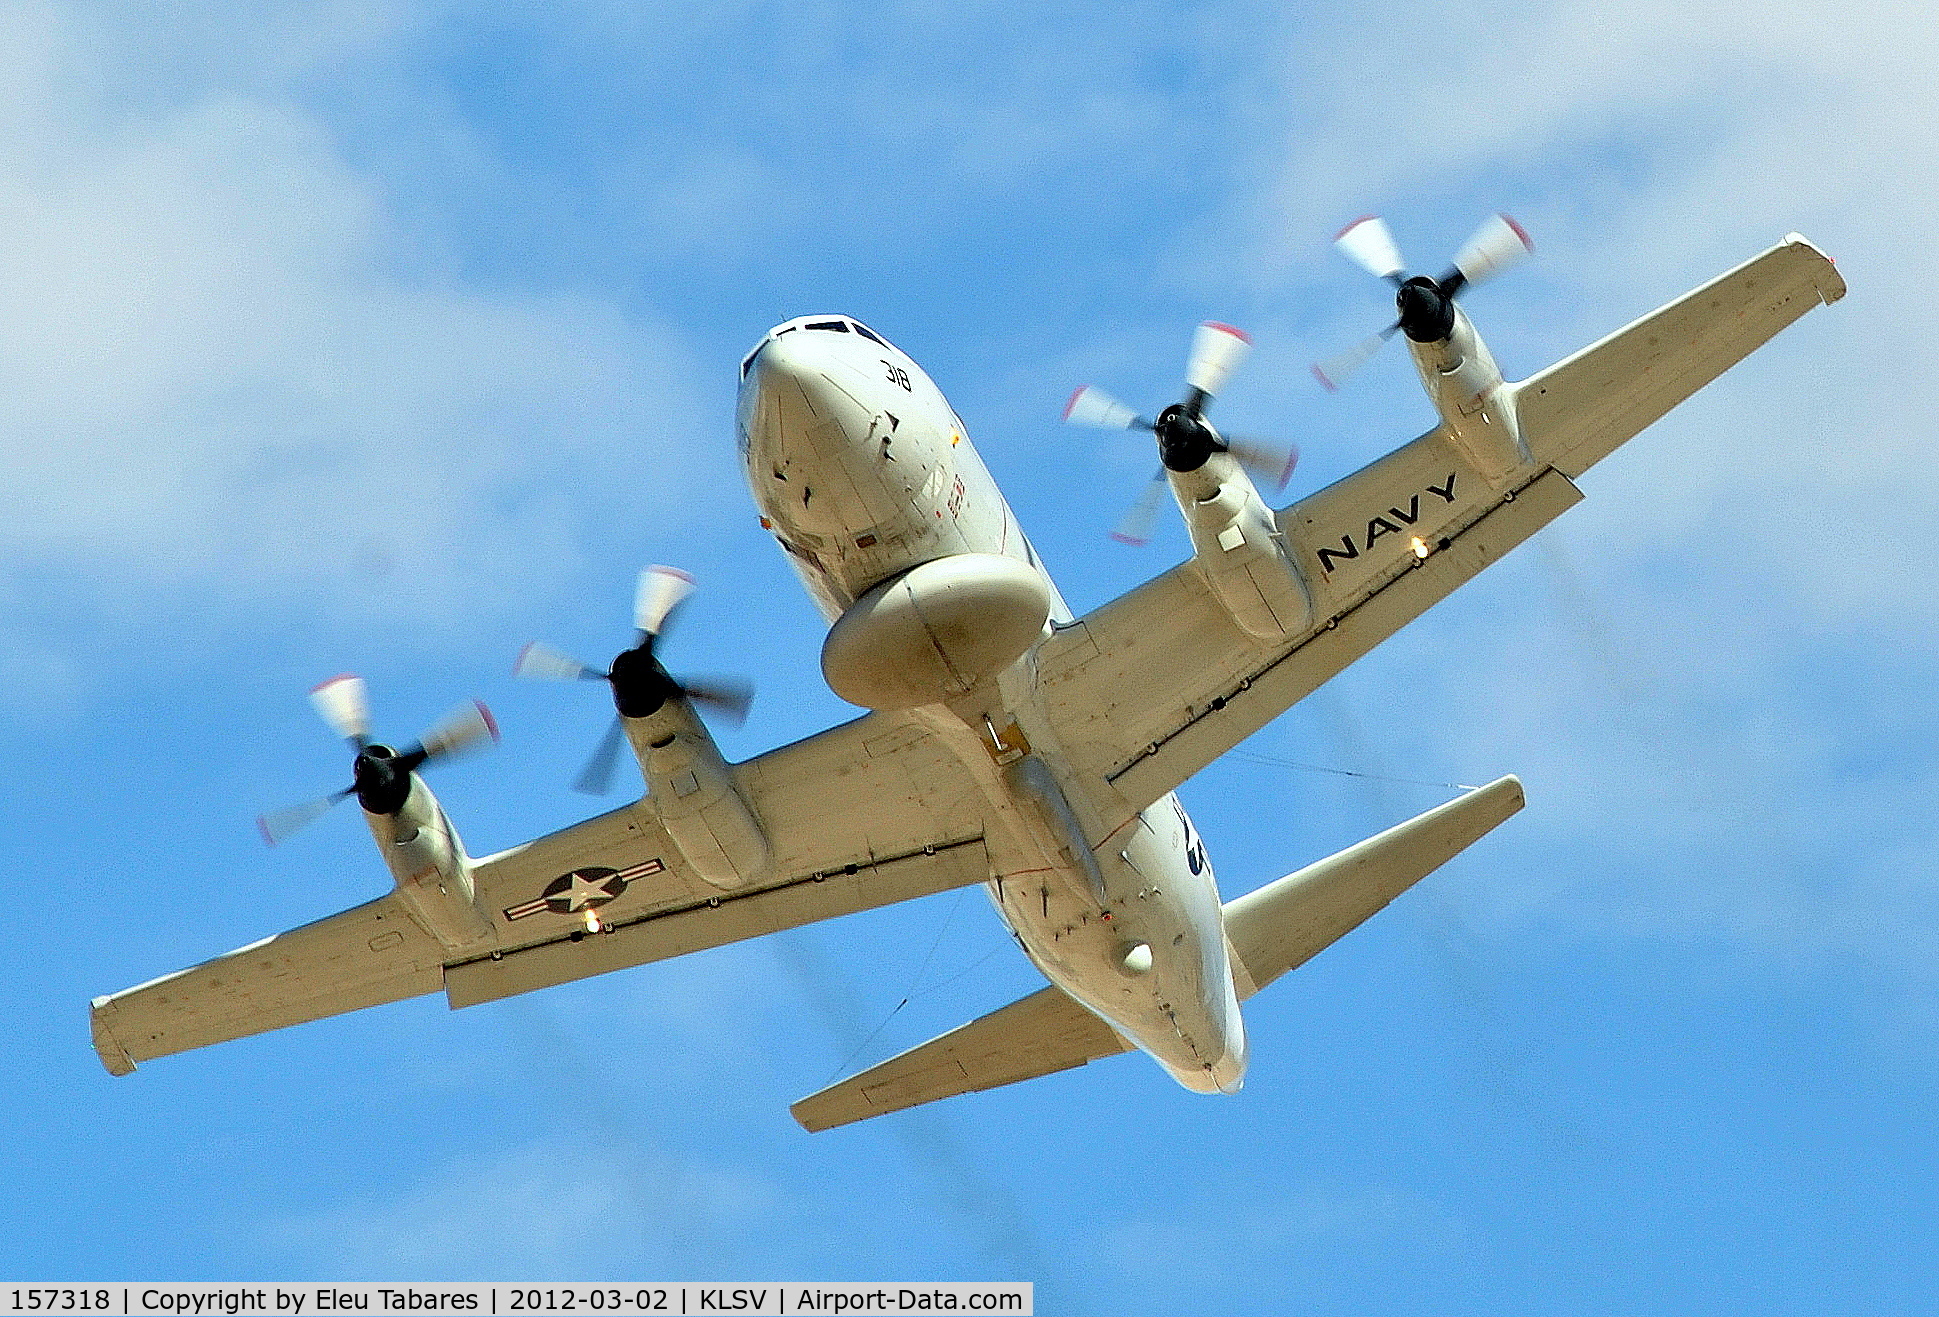 157318, Lockheed EP-3E Aries II C/N 285A-5533, Taken during Red Flag Exercise at Nellis Air Force Base, Nevada.